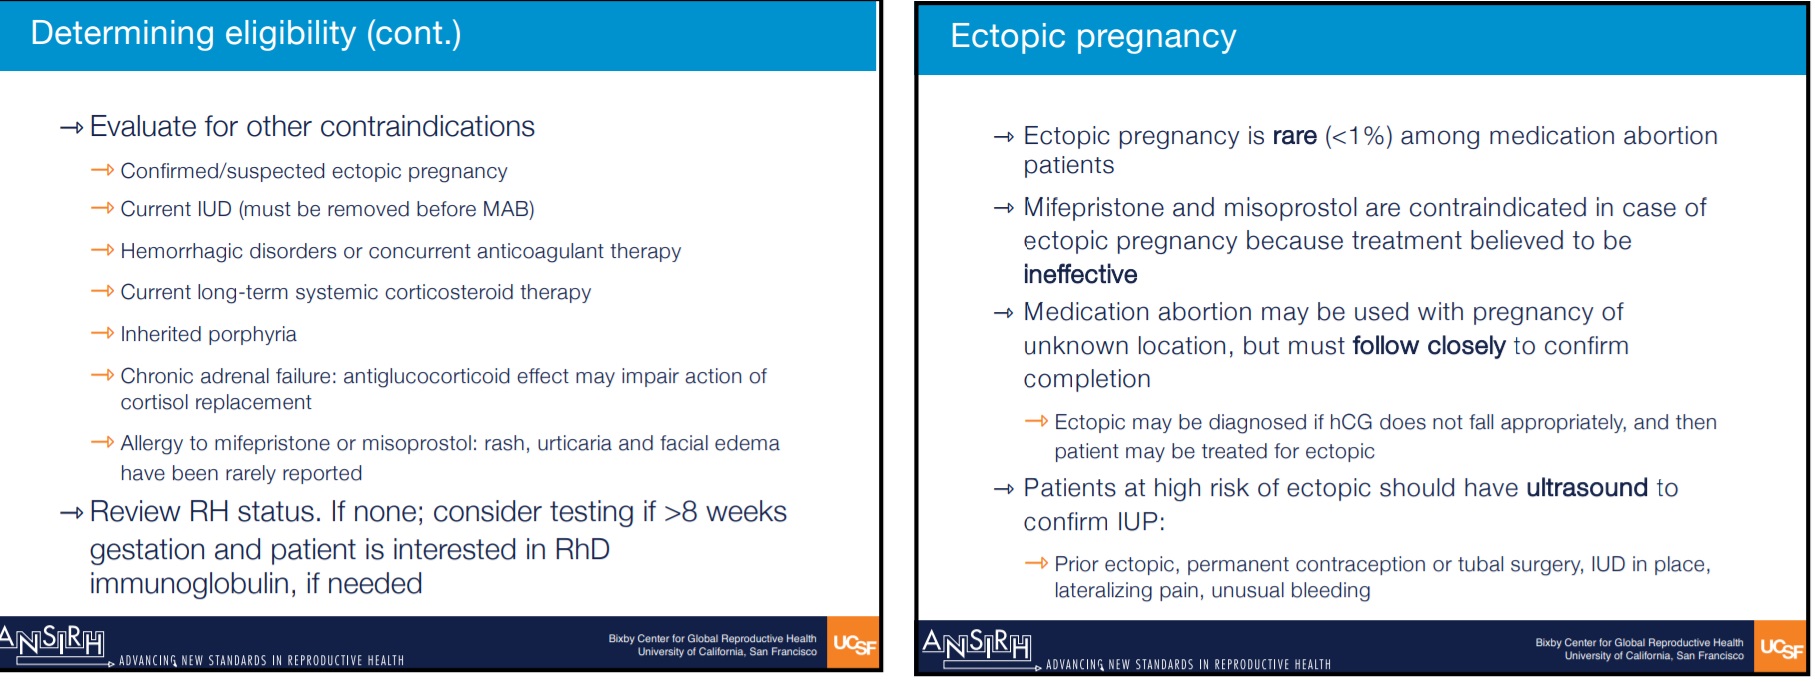 ANSIRH pharmacy abortion pill course notes several potential complications b